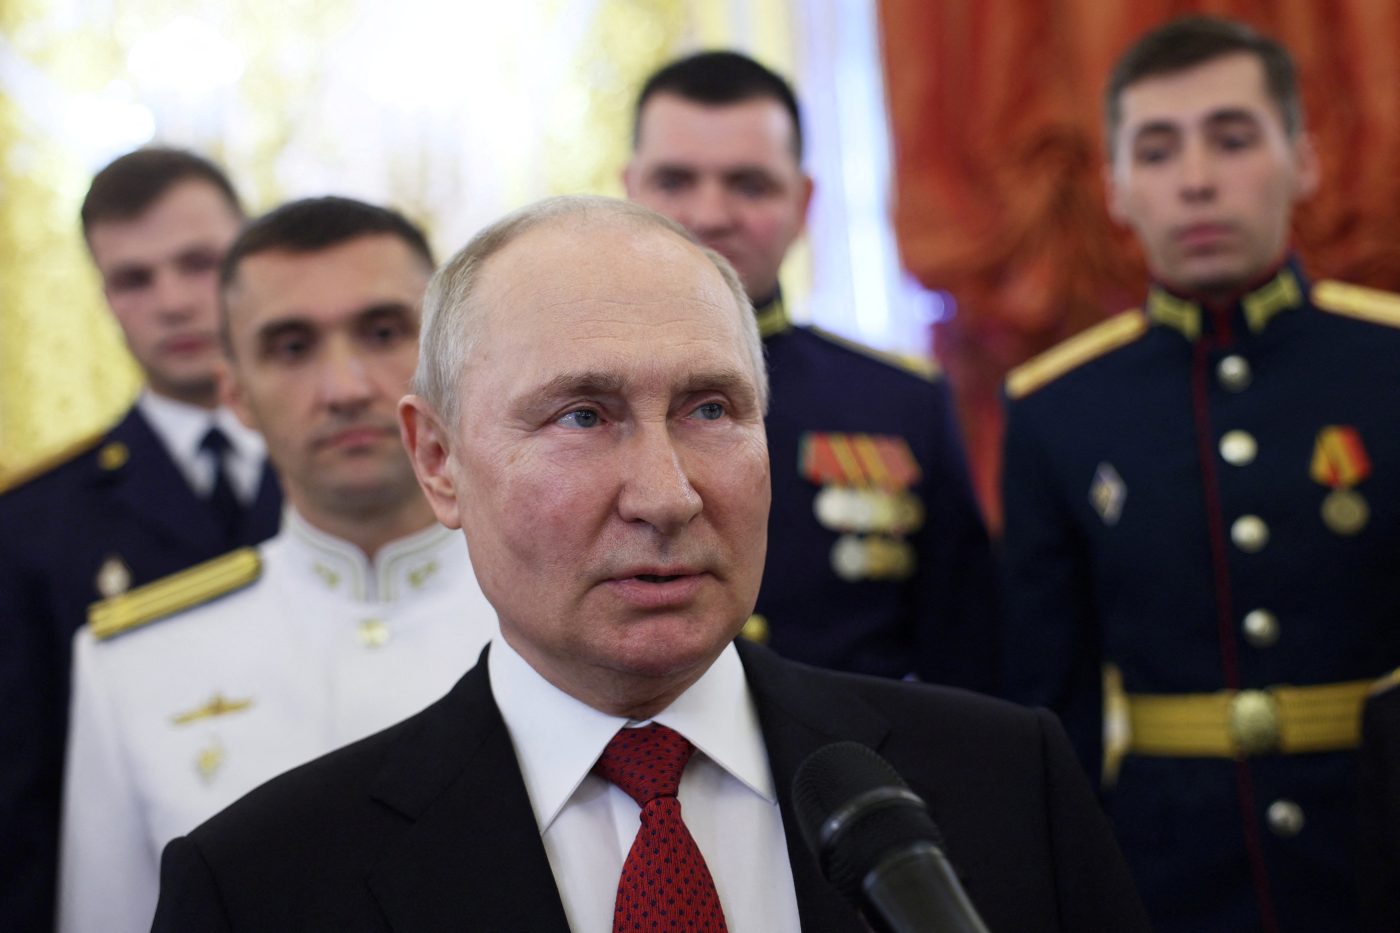 Photo: Russian President Vladimir Putin attends a meeting with graduates of the country's military higher education institutions at the Kremlin in Moscow, Russia June 21, 2023. Credit: Sputnik/Gavriil Grigorov/Kremlin via REUTERS